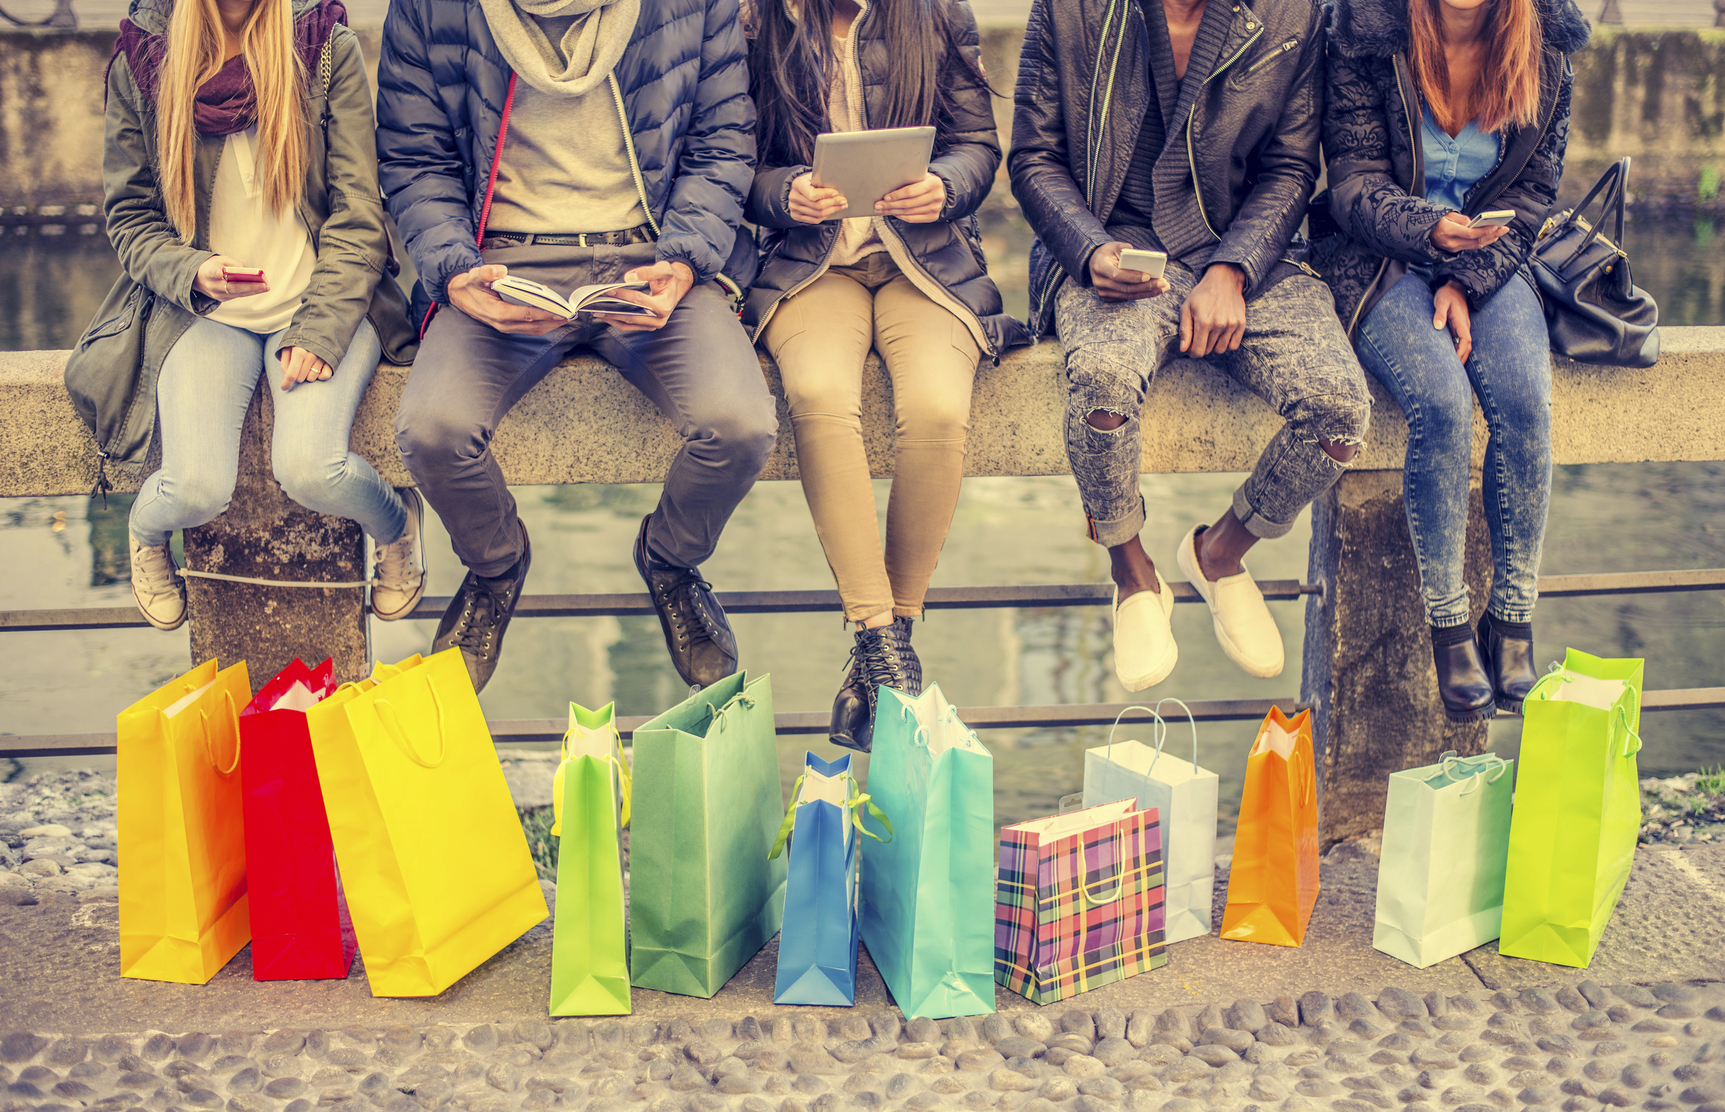 Group of friends sitting outdoors with shopping bags - Several people holding smartphones and tablets - Concepts about lifestyle,shopping,technology and friendship